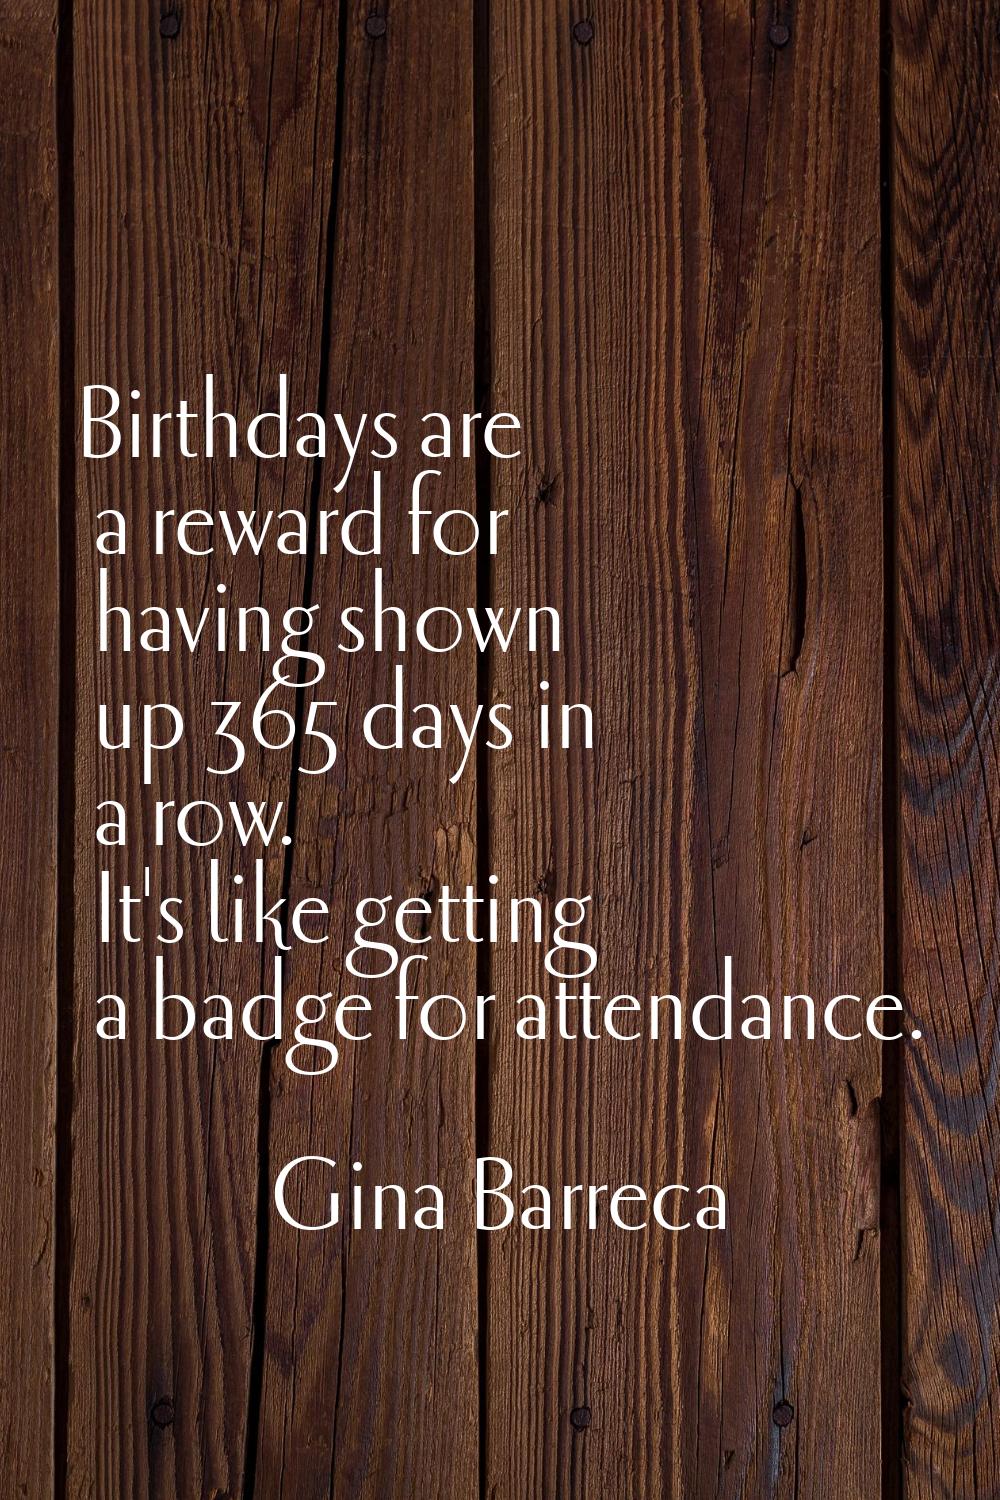 Birthdays are a reward for having shown up 365 days in a row. It's like getting a badge for attenda